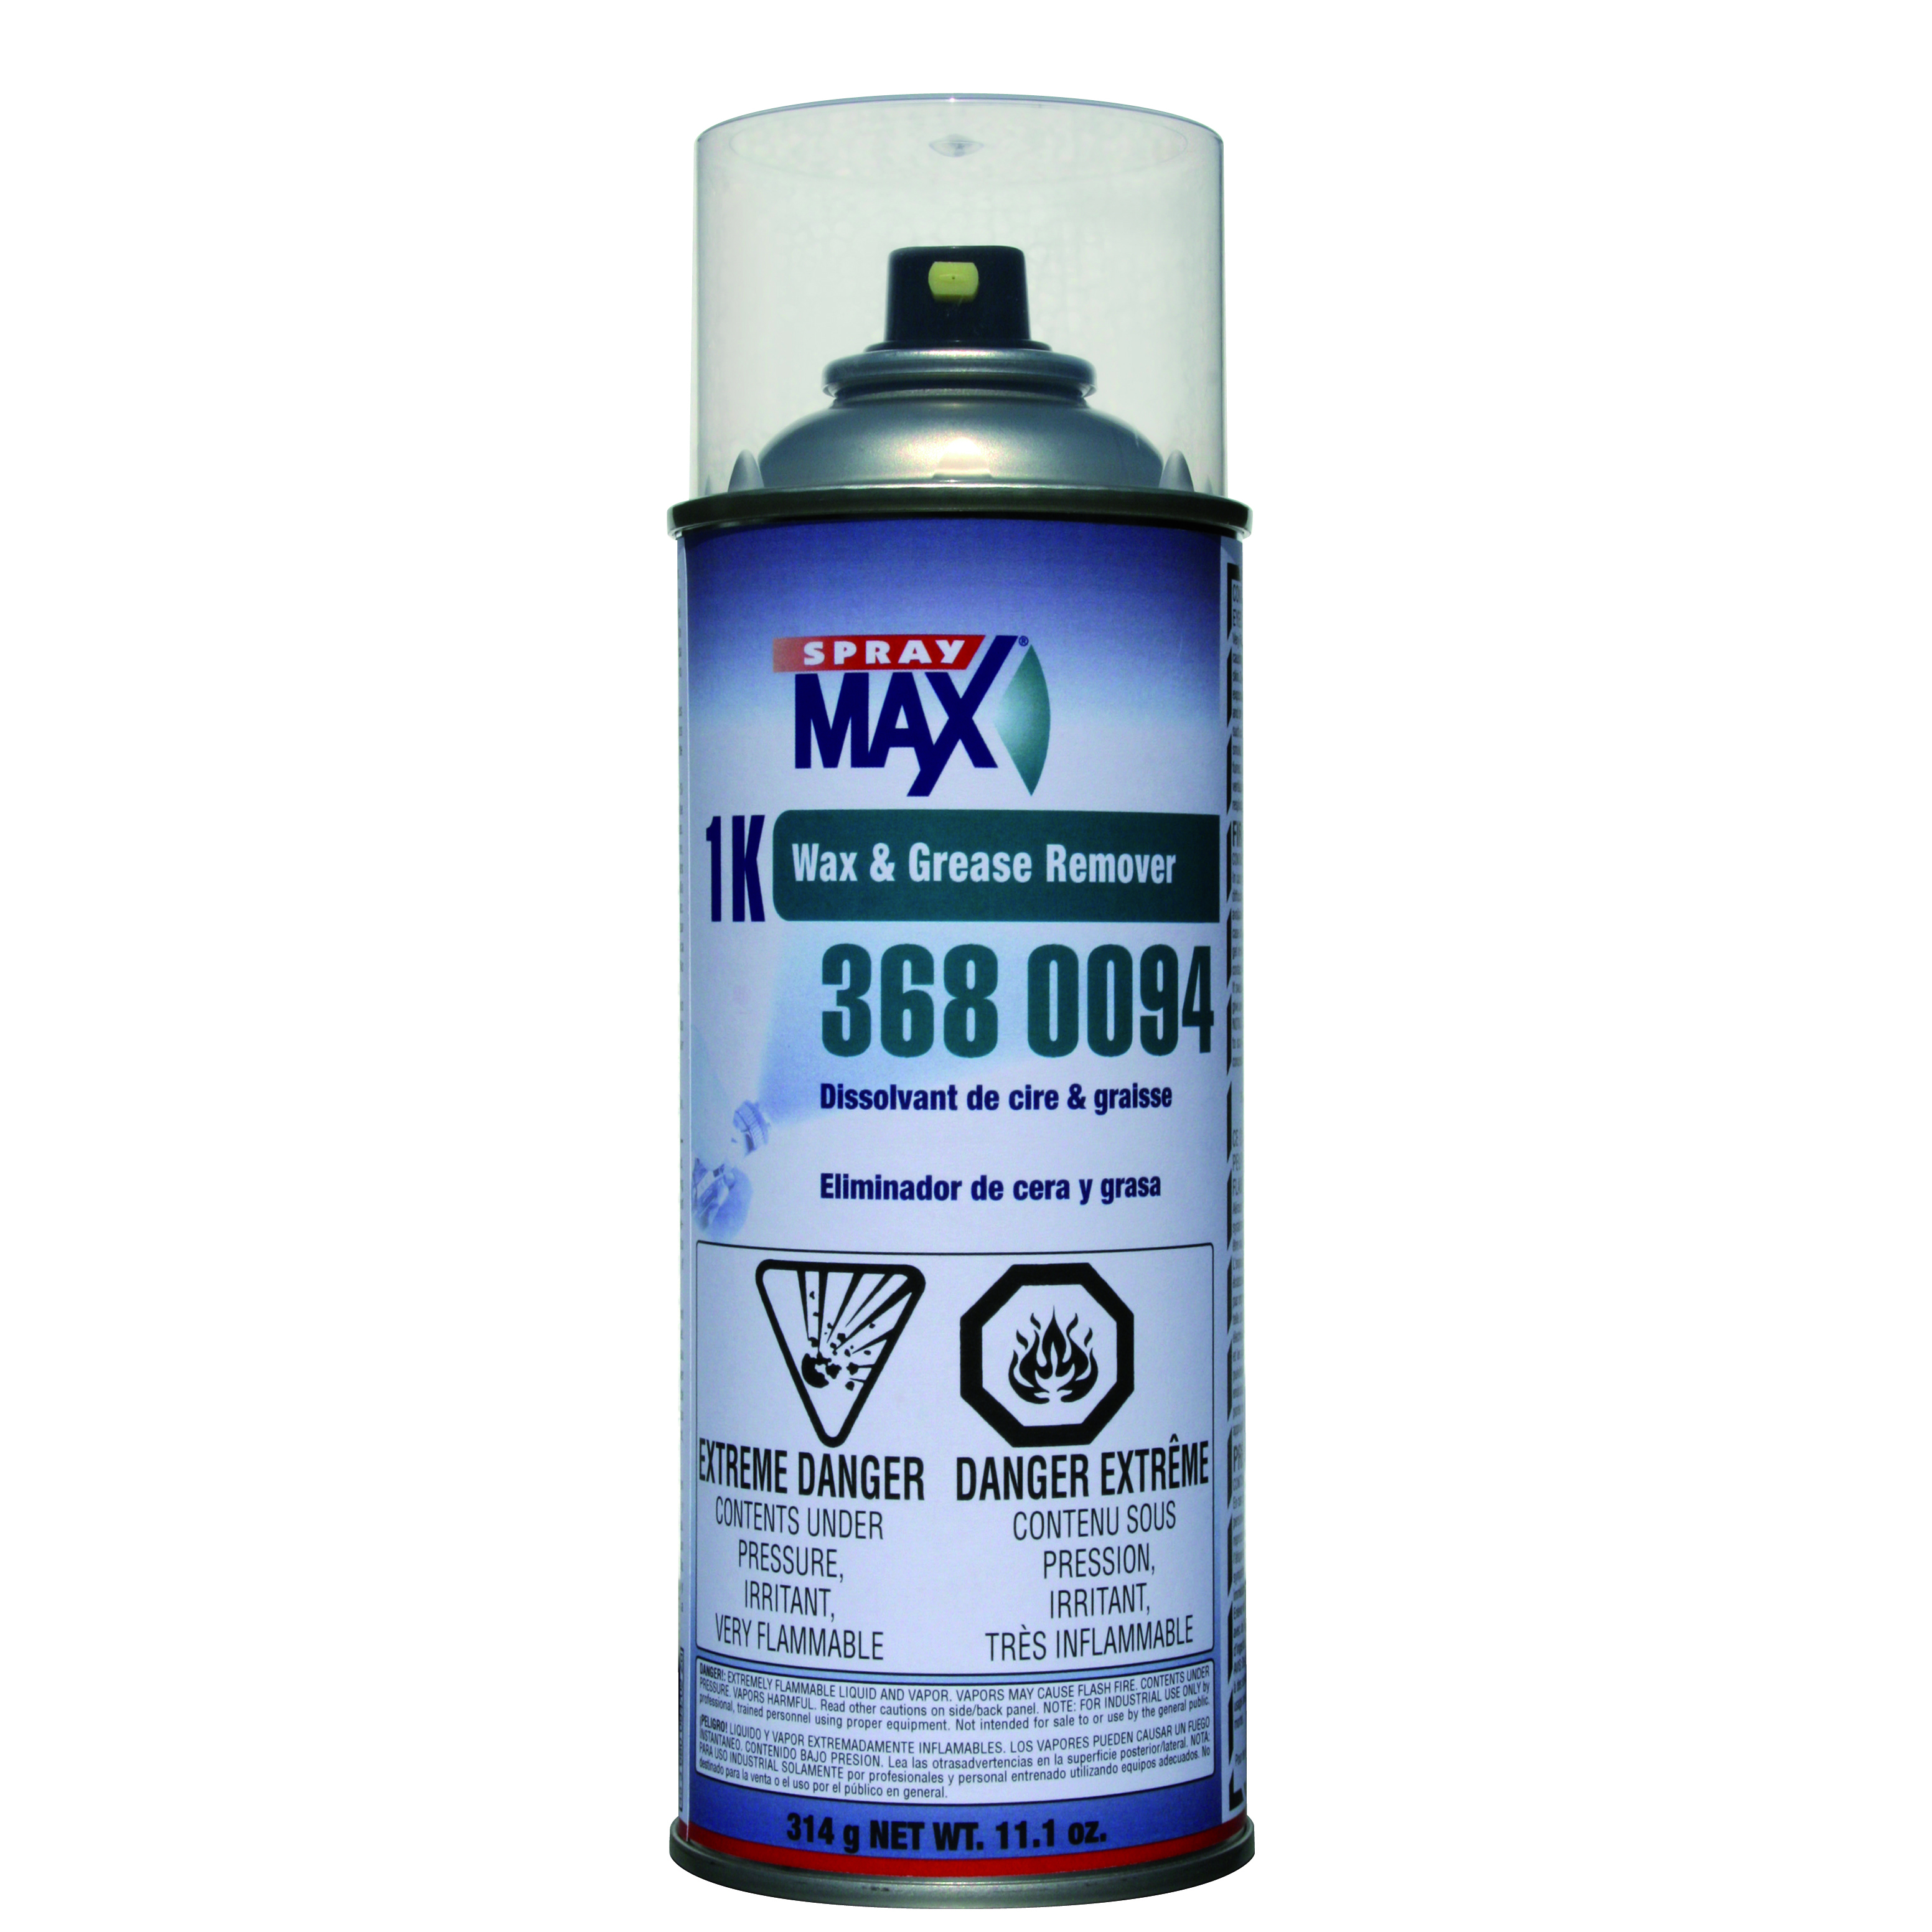 USC-Wax-Grease-Remover-3680094